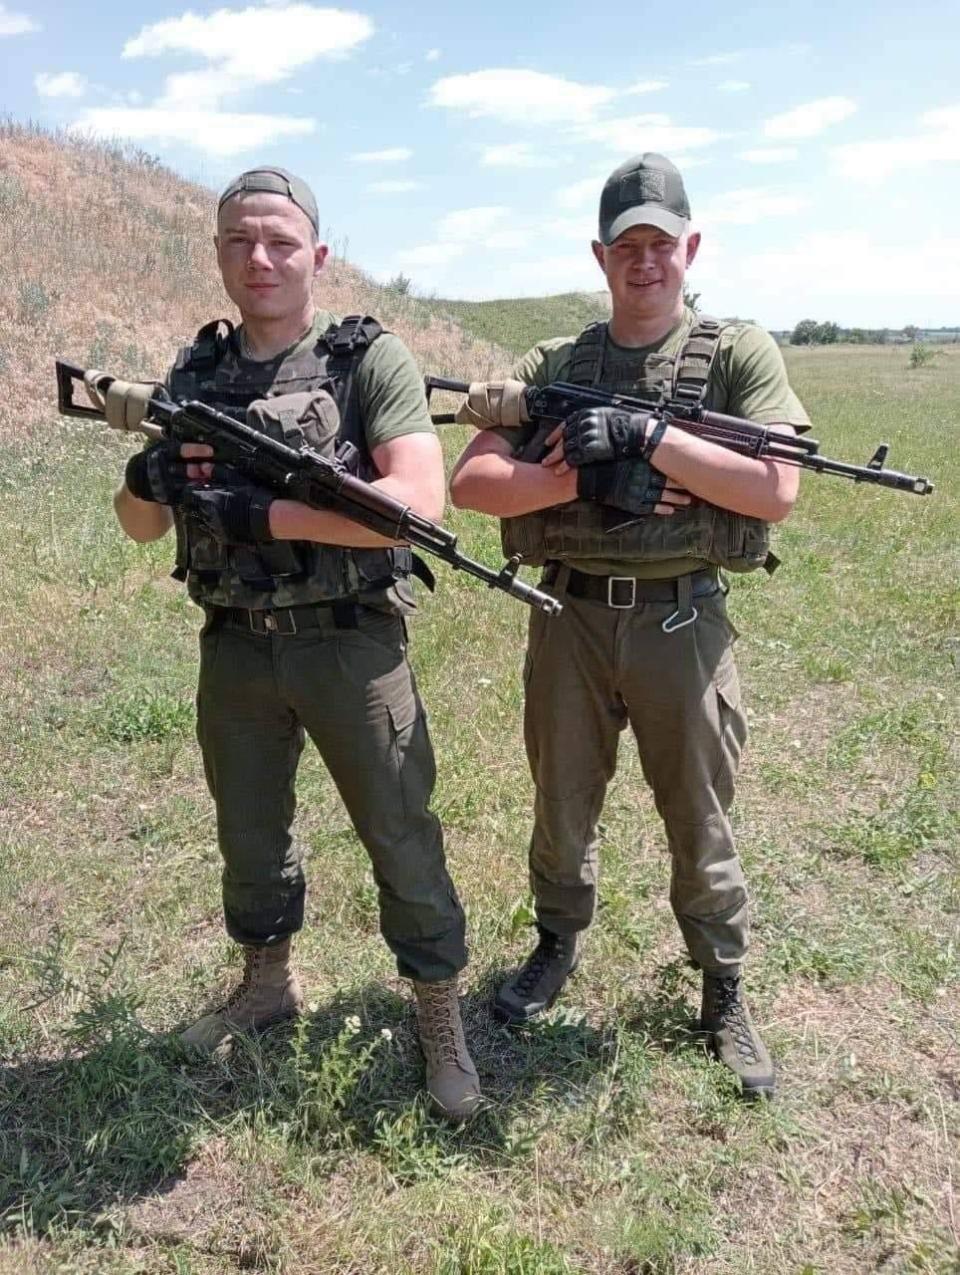 Military recipients of Ikos combat boots stand for a picture somewhere near Lysychansk, Ukraine. The picture was received in mid-June 2022 by a Slater woman who's been sending money to Ikos, a Ukrainian shoe company where a friend works, which has been working to supply Ukrainian forces fighting against Russia's invasion.